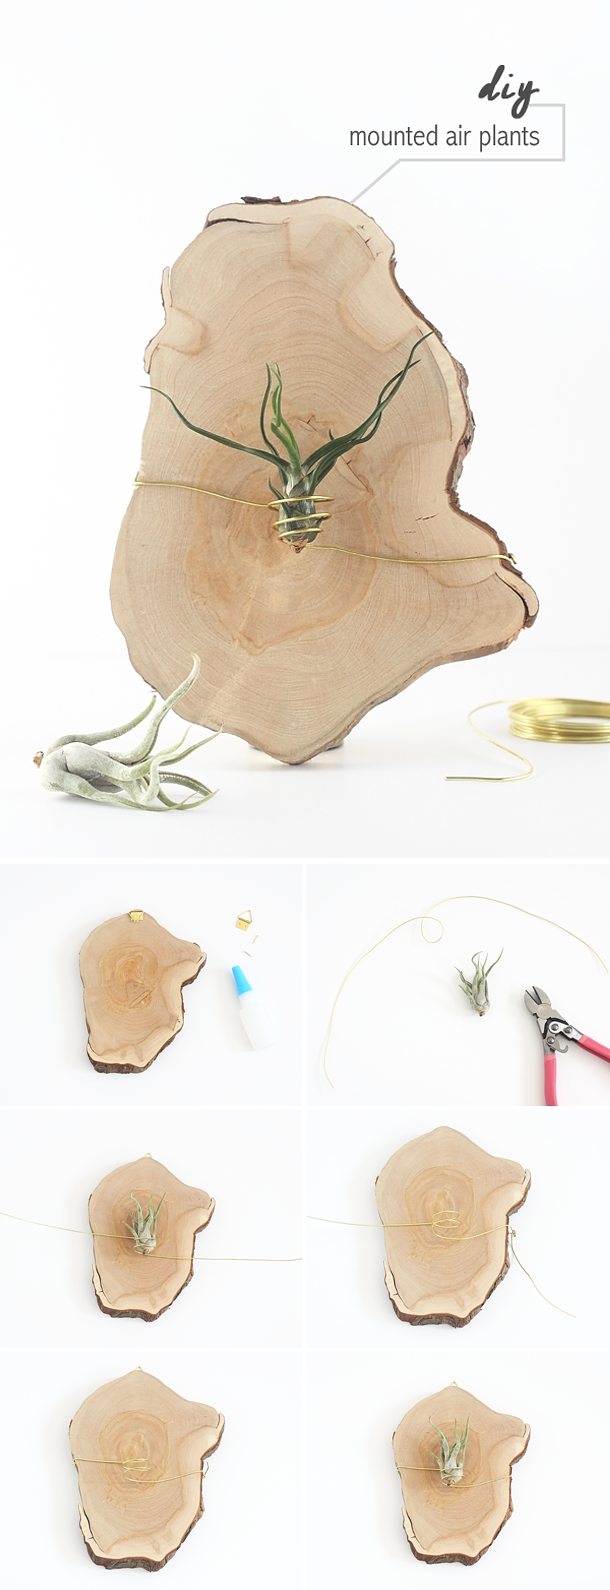 DIY Mounted Air Plants by Idle Hands Awake